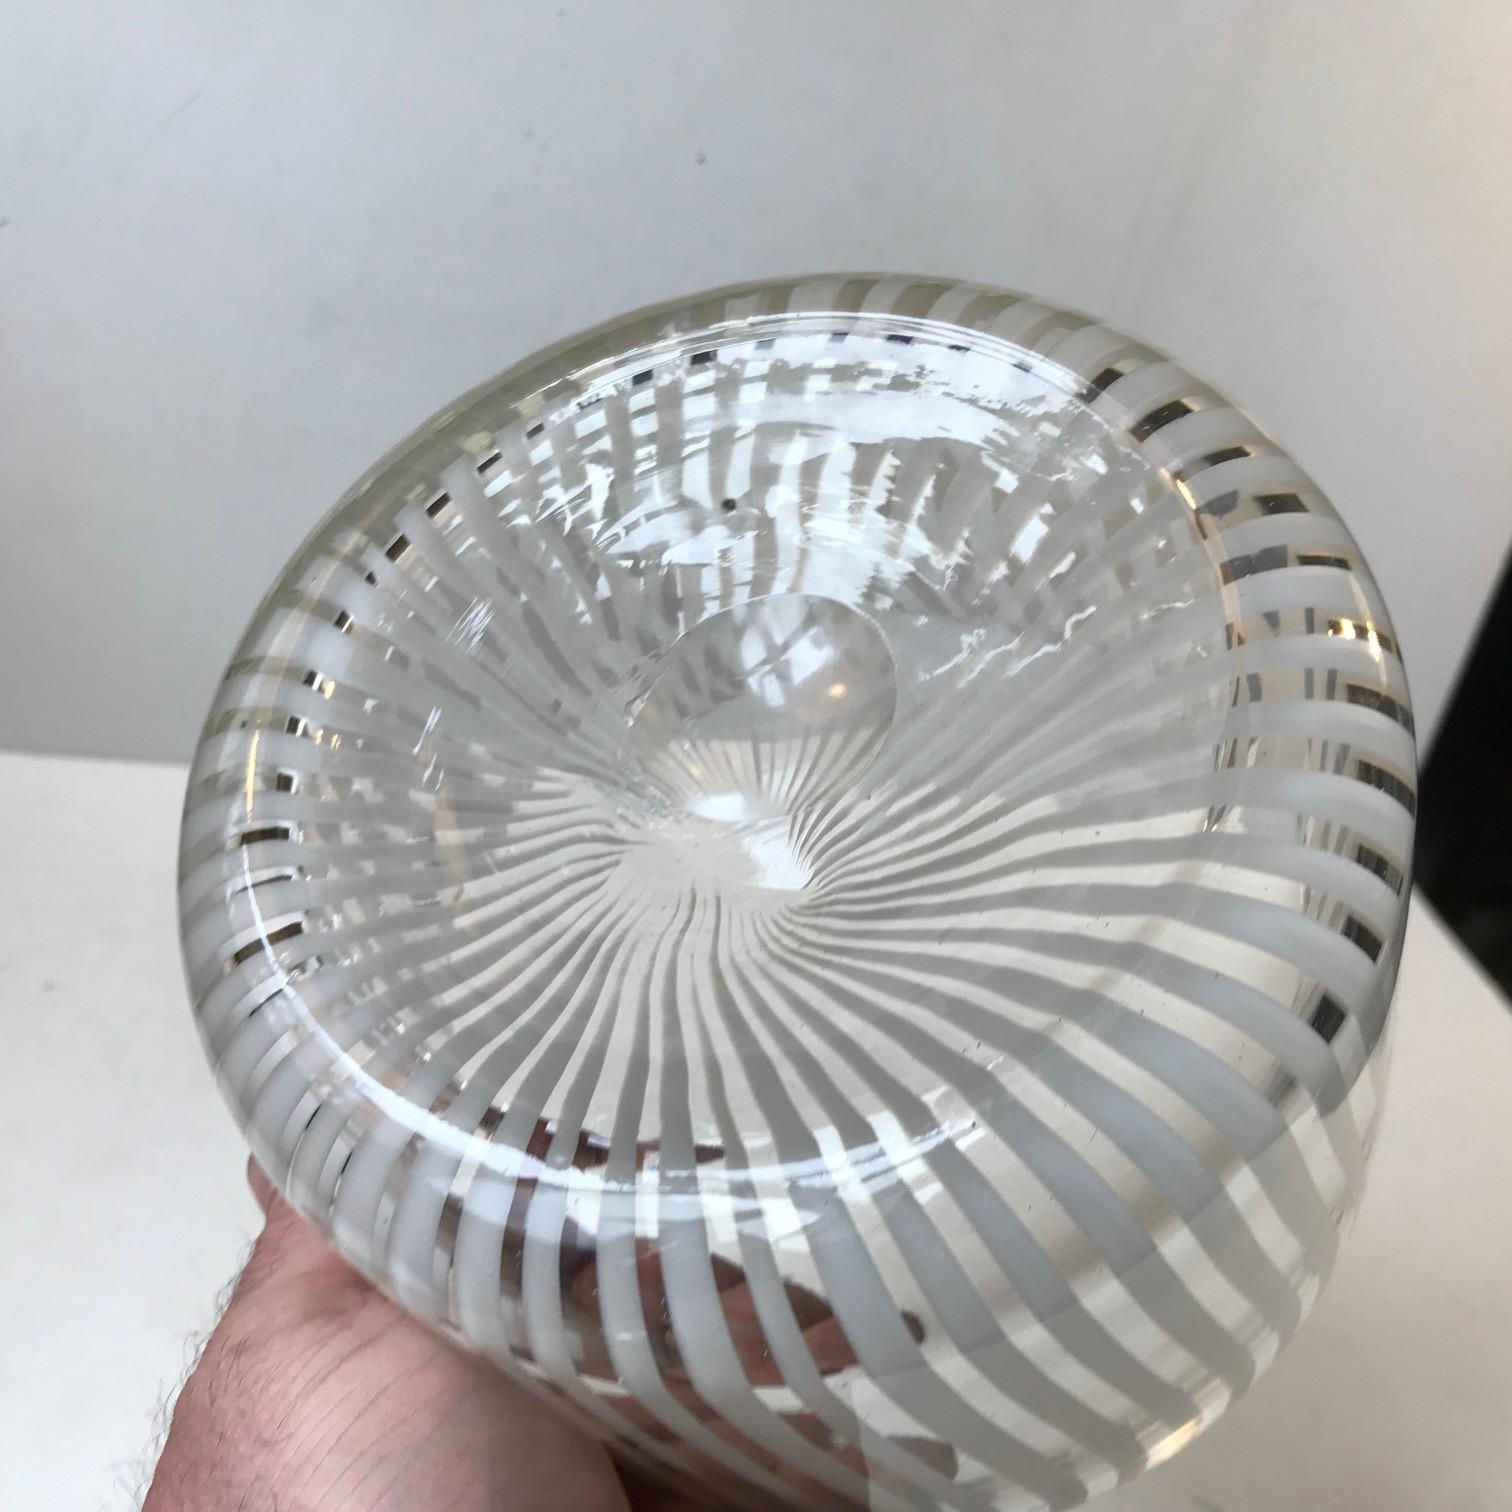 Italian Murano Art Glass Bowl with White Stripes from Venini, 1960s For Sale